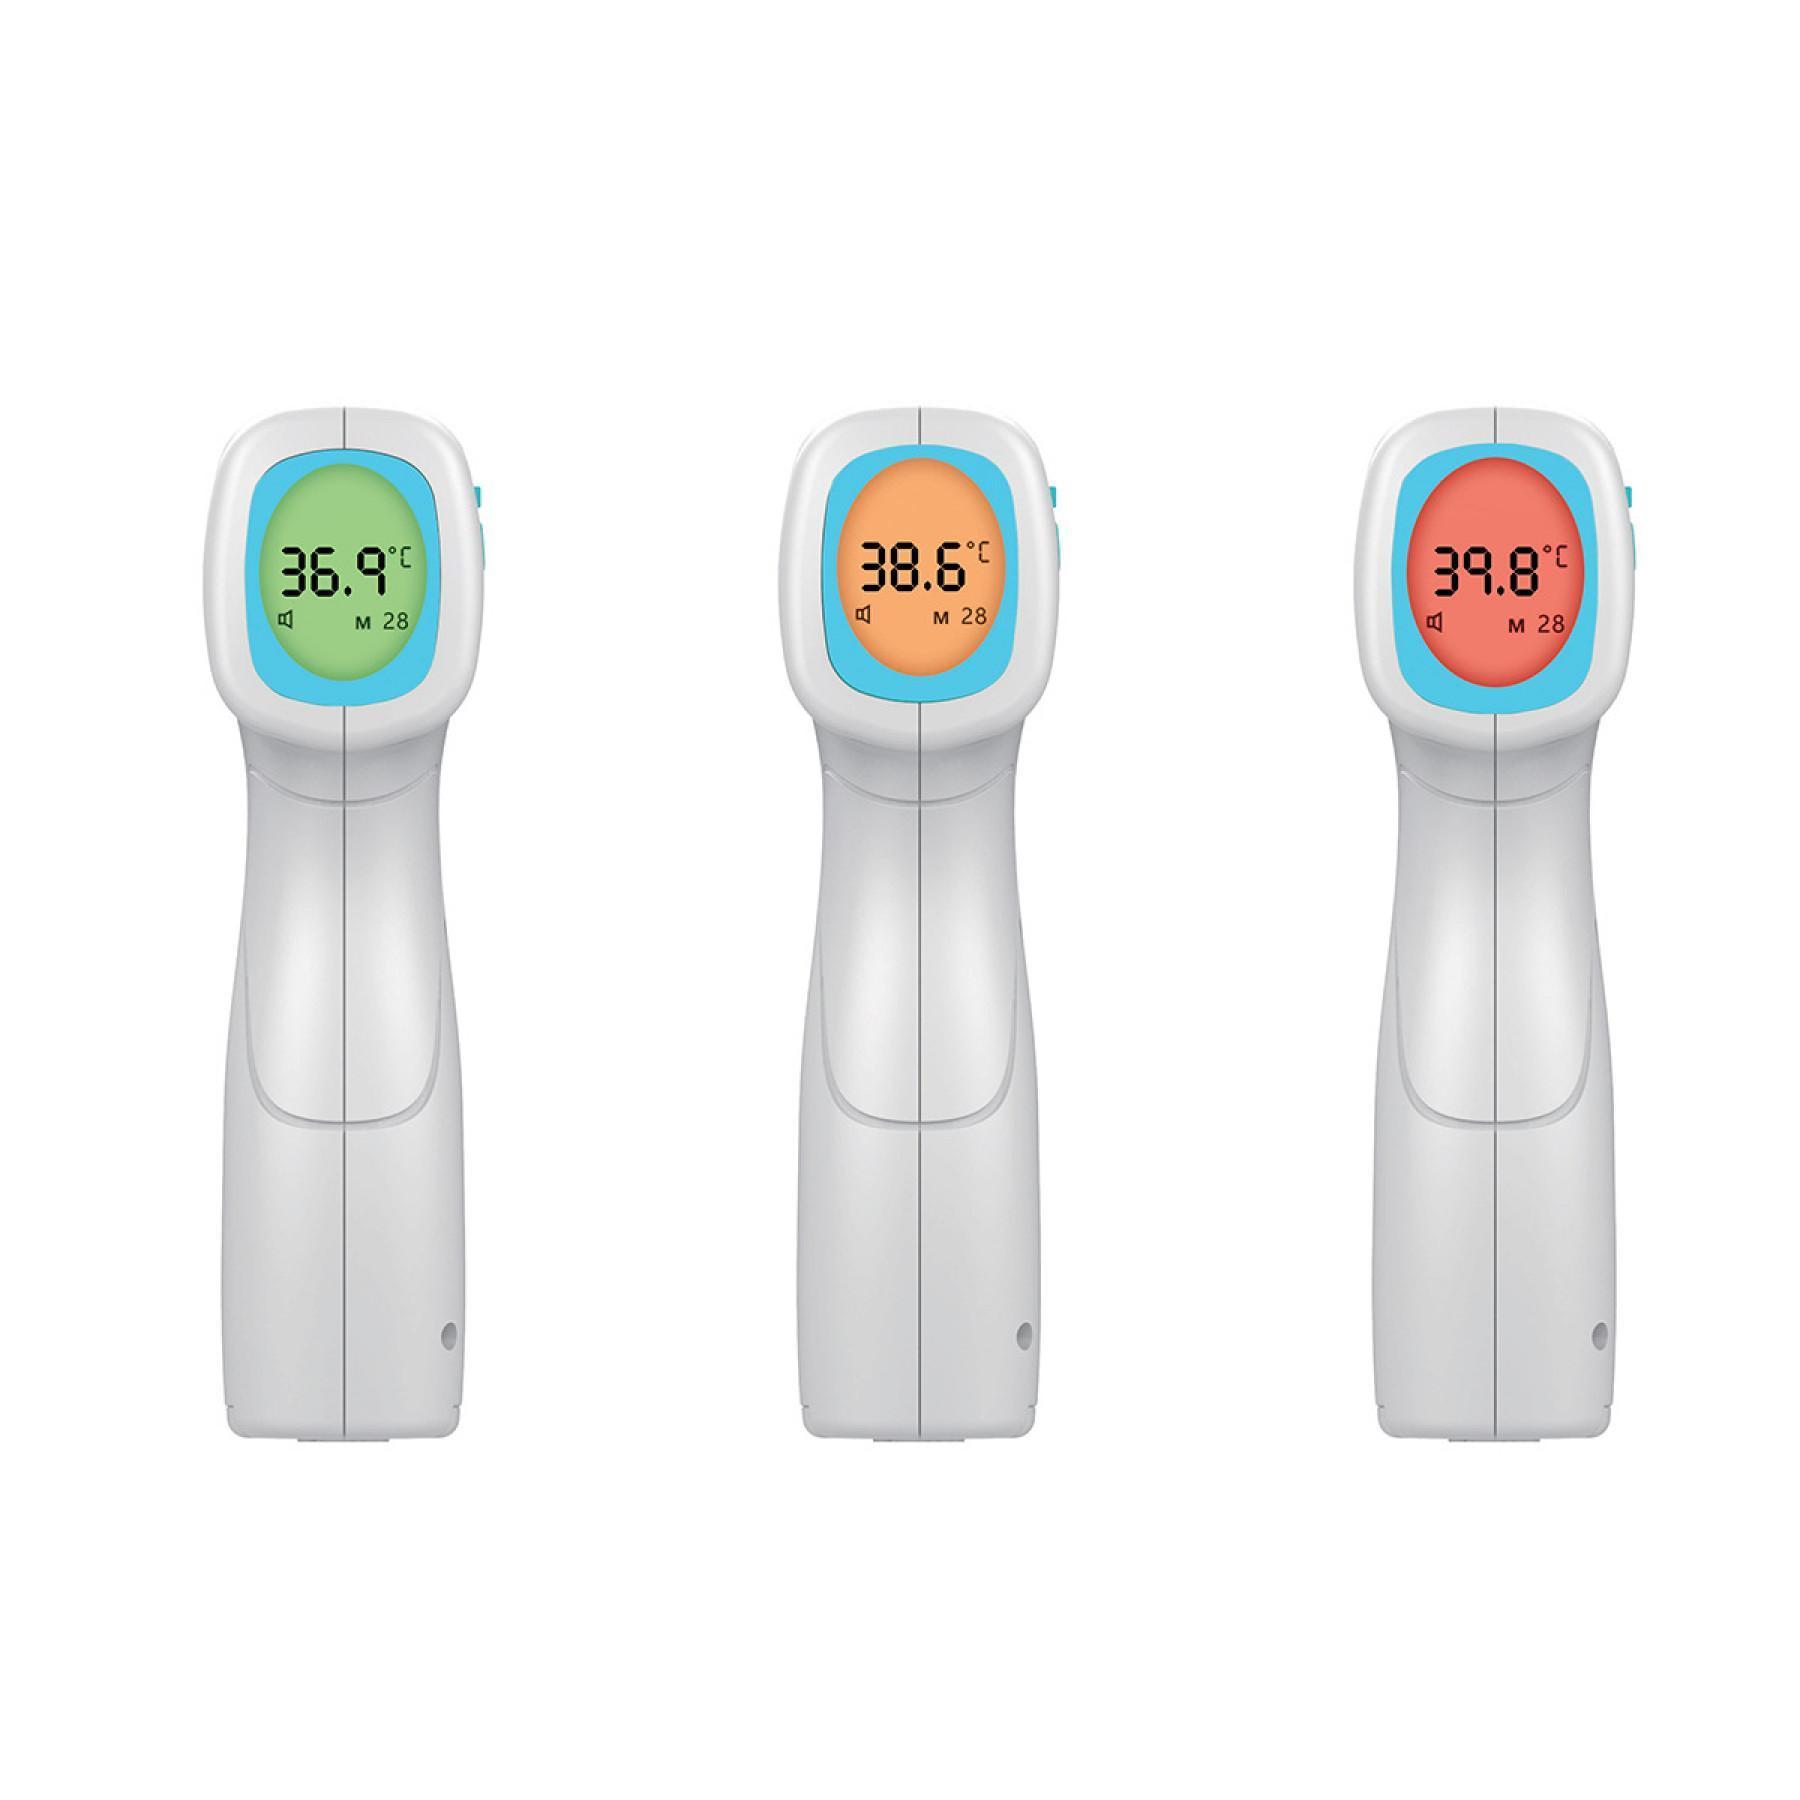 Infrared thermometer without contact Sporti France